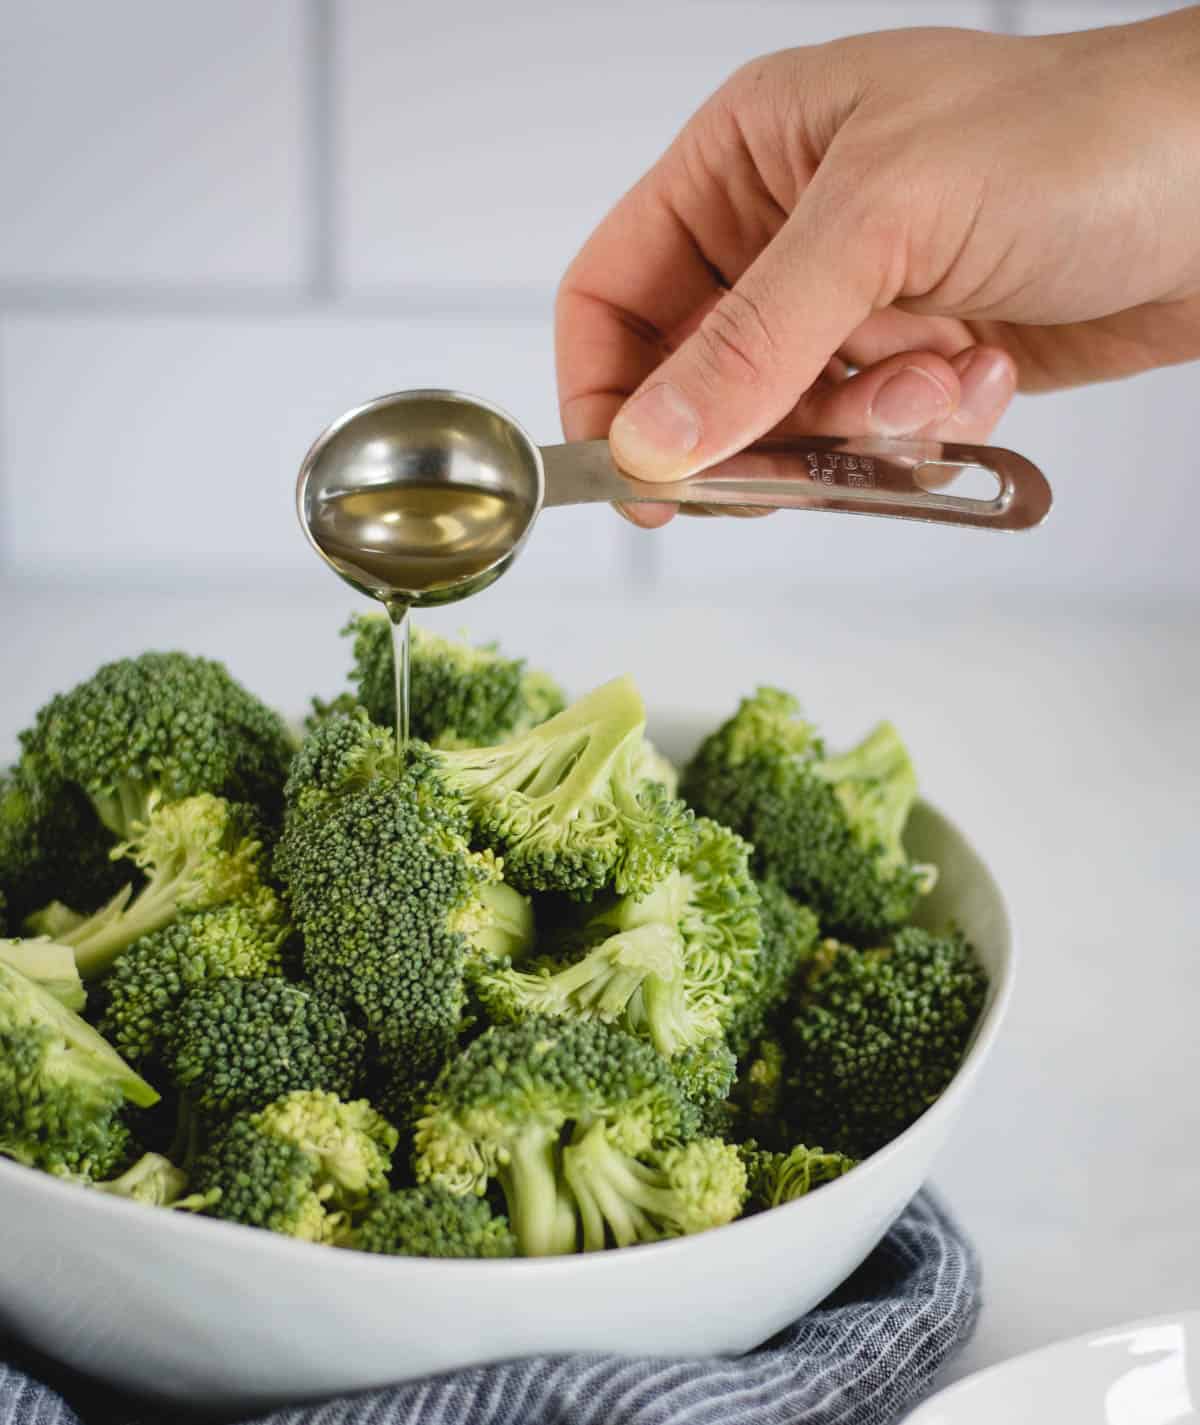 oil being poured onto a bowl of broccoli